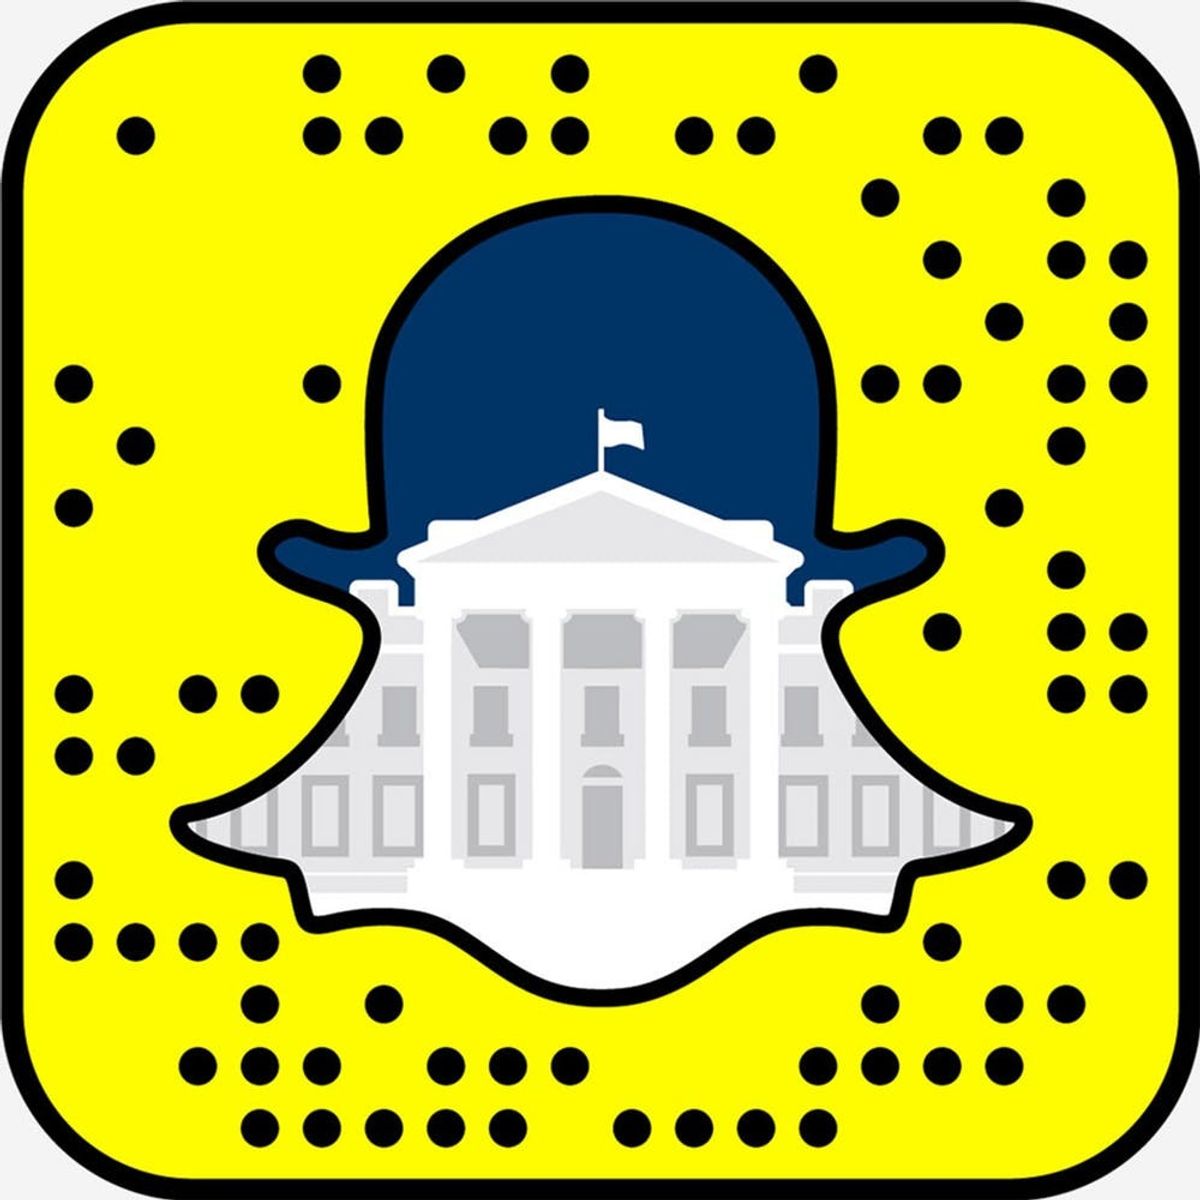 You Can Now Follow the President and White House on Snapchat